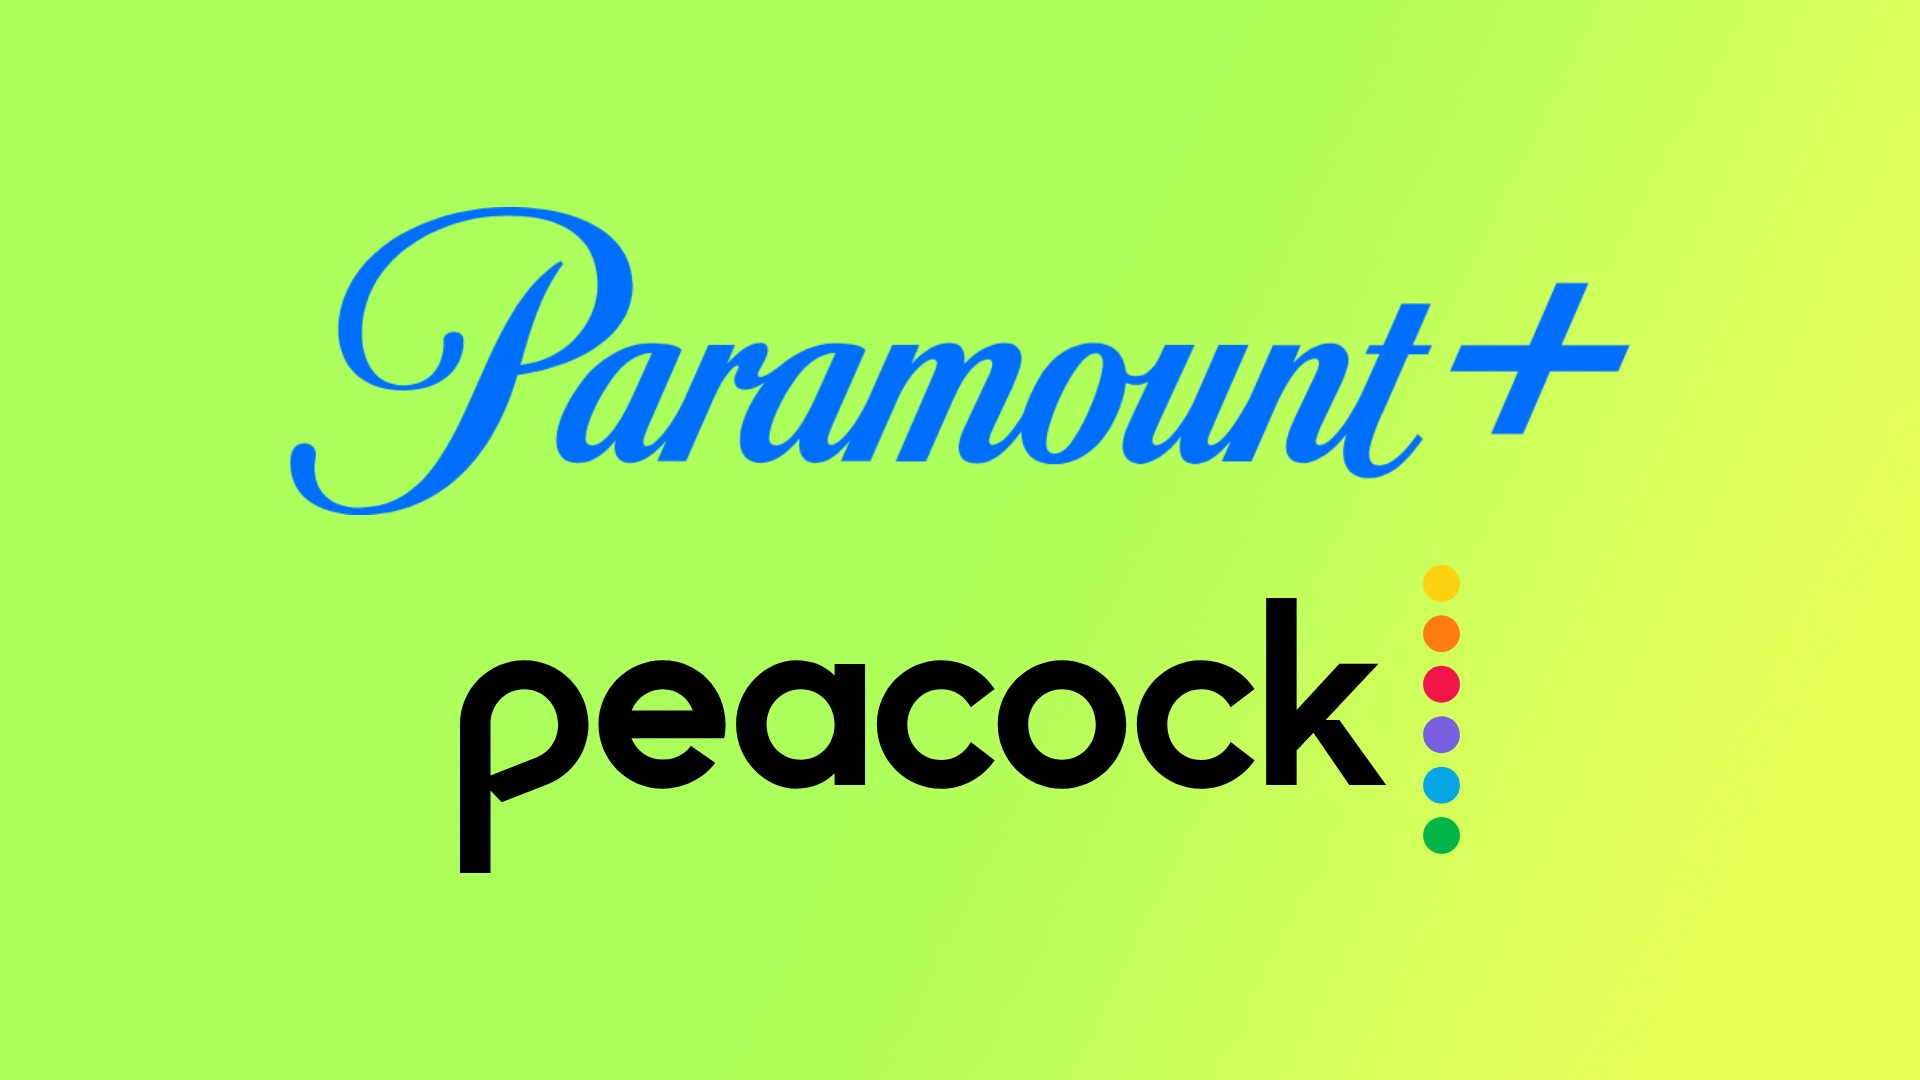 Paramount+ and Peacock streaming services could soon be merged